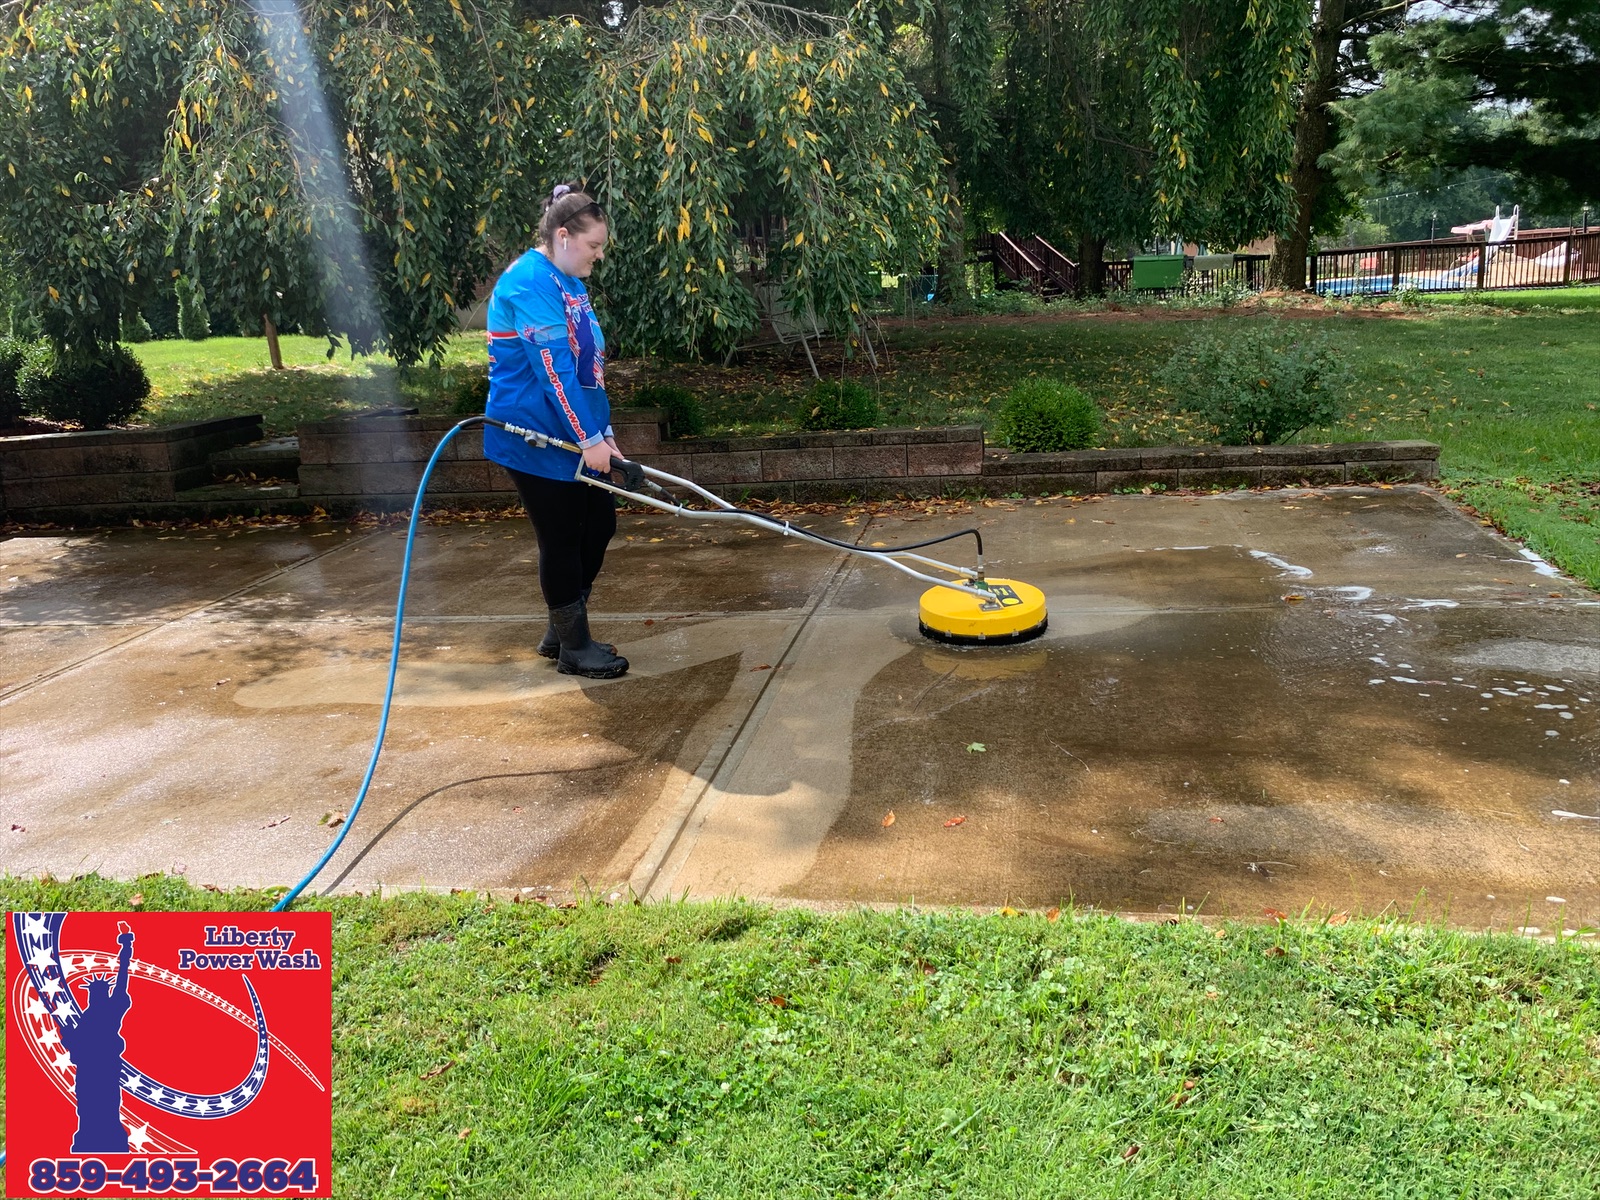 Concrete Cleaning | Liberty Power Wash Paver Cleaning